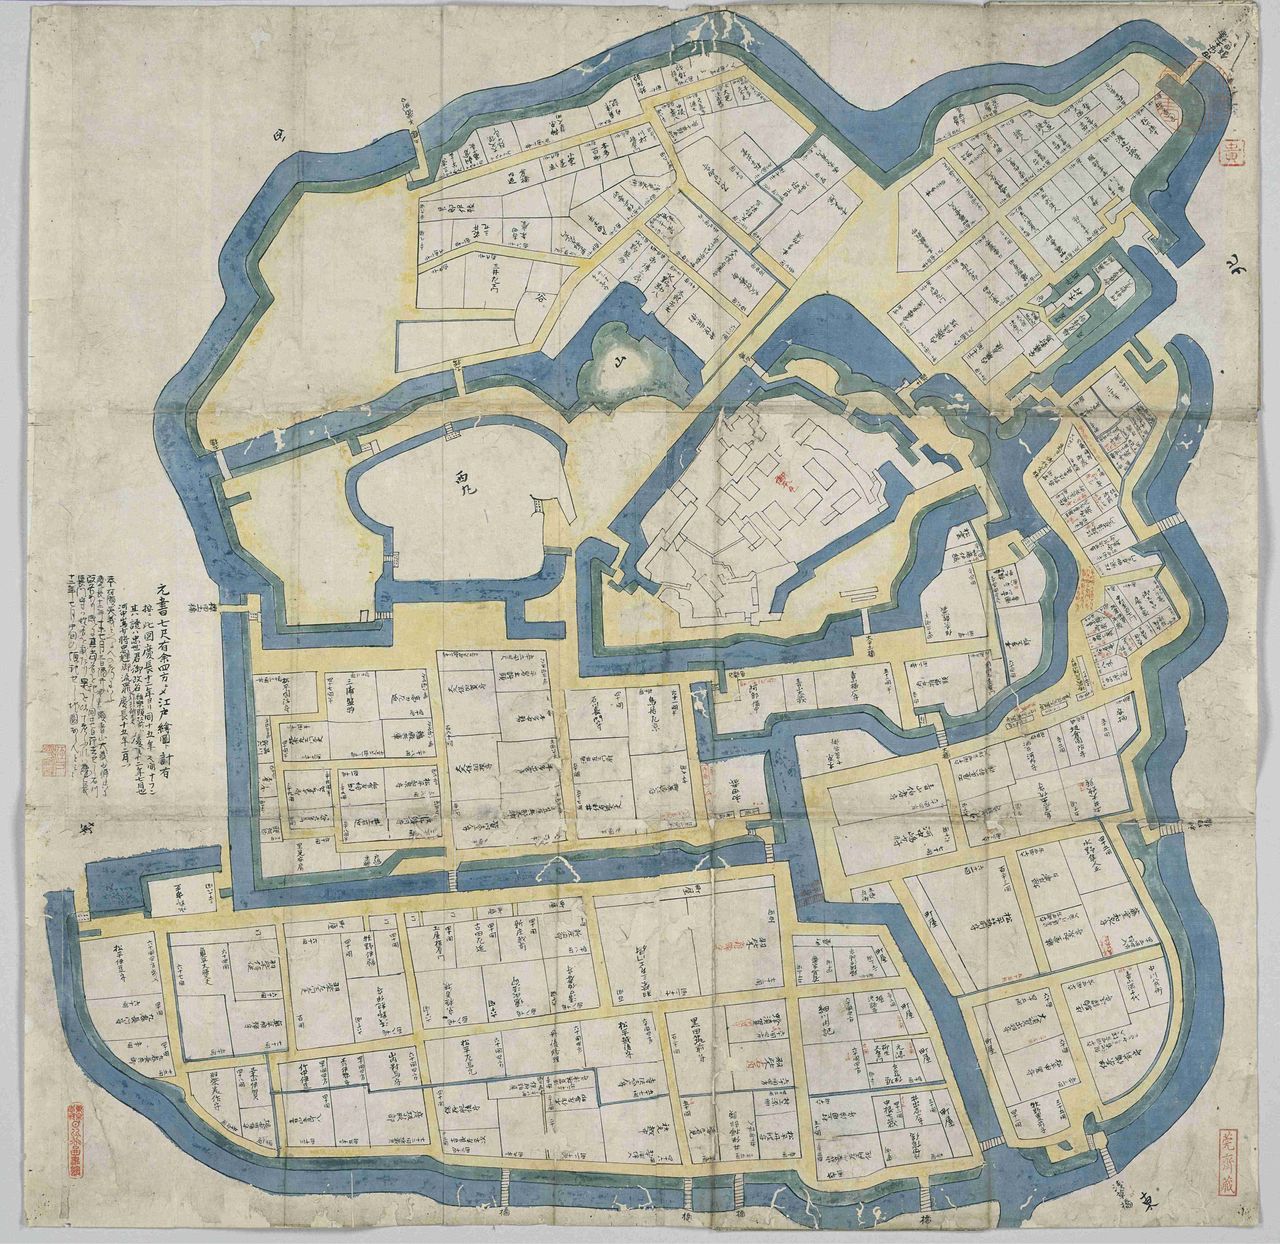 A plan of Edo Castle in the 1608 Keichō Edo ezu (Illustrations of Edo in the Keichō Era [1596–1615]). It is thought to have been drawn shortly after the establishment of the shogunate, showing the castle and its environs. (Courtesy the Tokyo Metropolitan Central Library Special Collection Room)